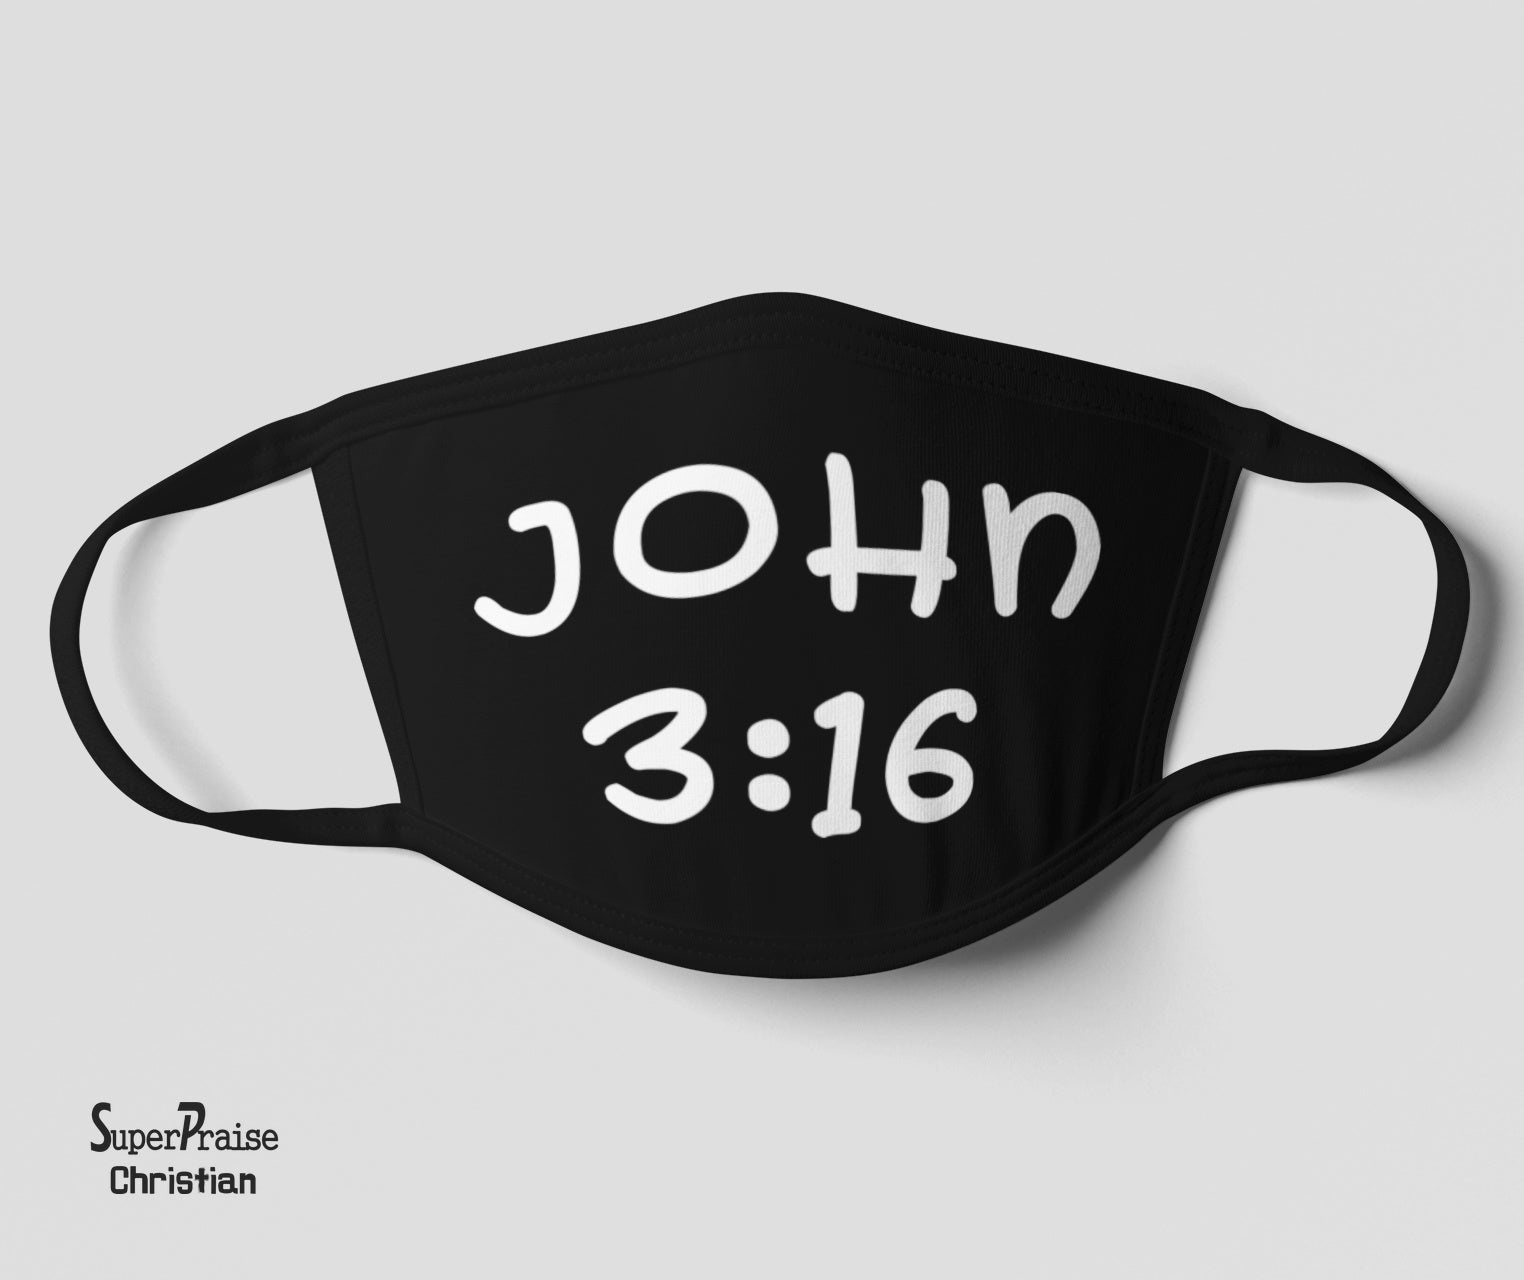 Christian Based Face Mask Covering Collection